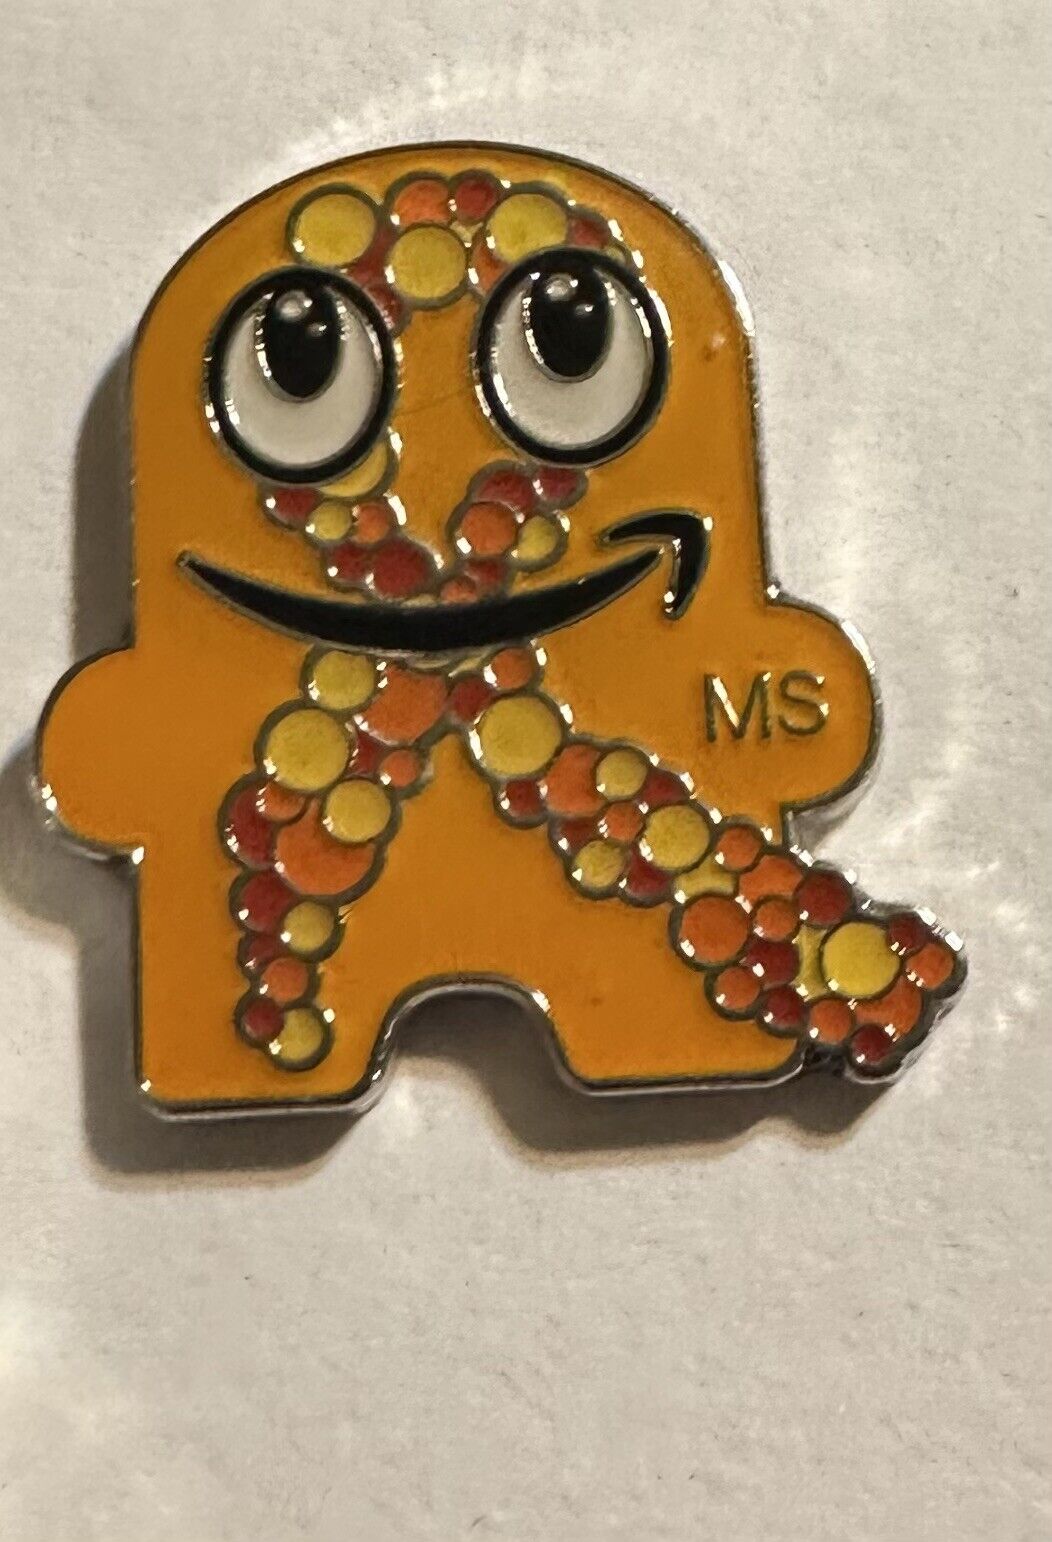 Peccy Multiple Sclerosis Pin